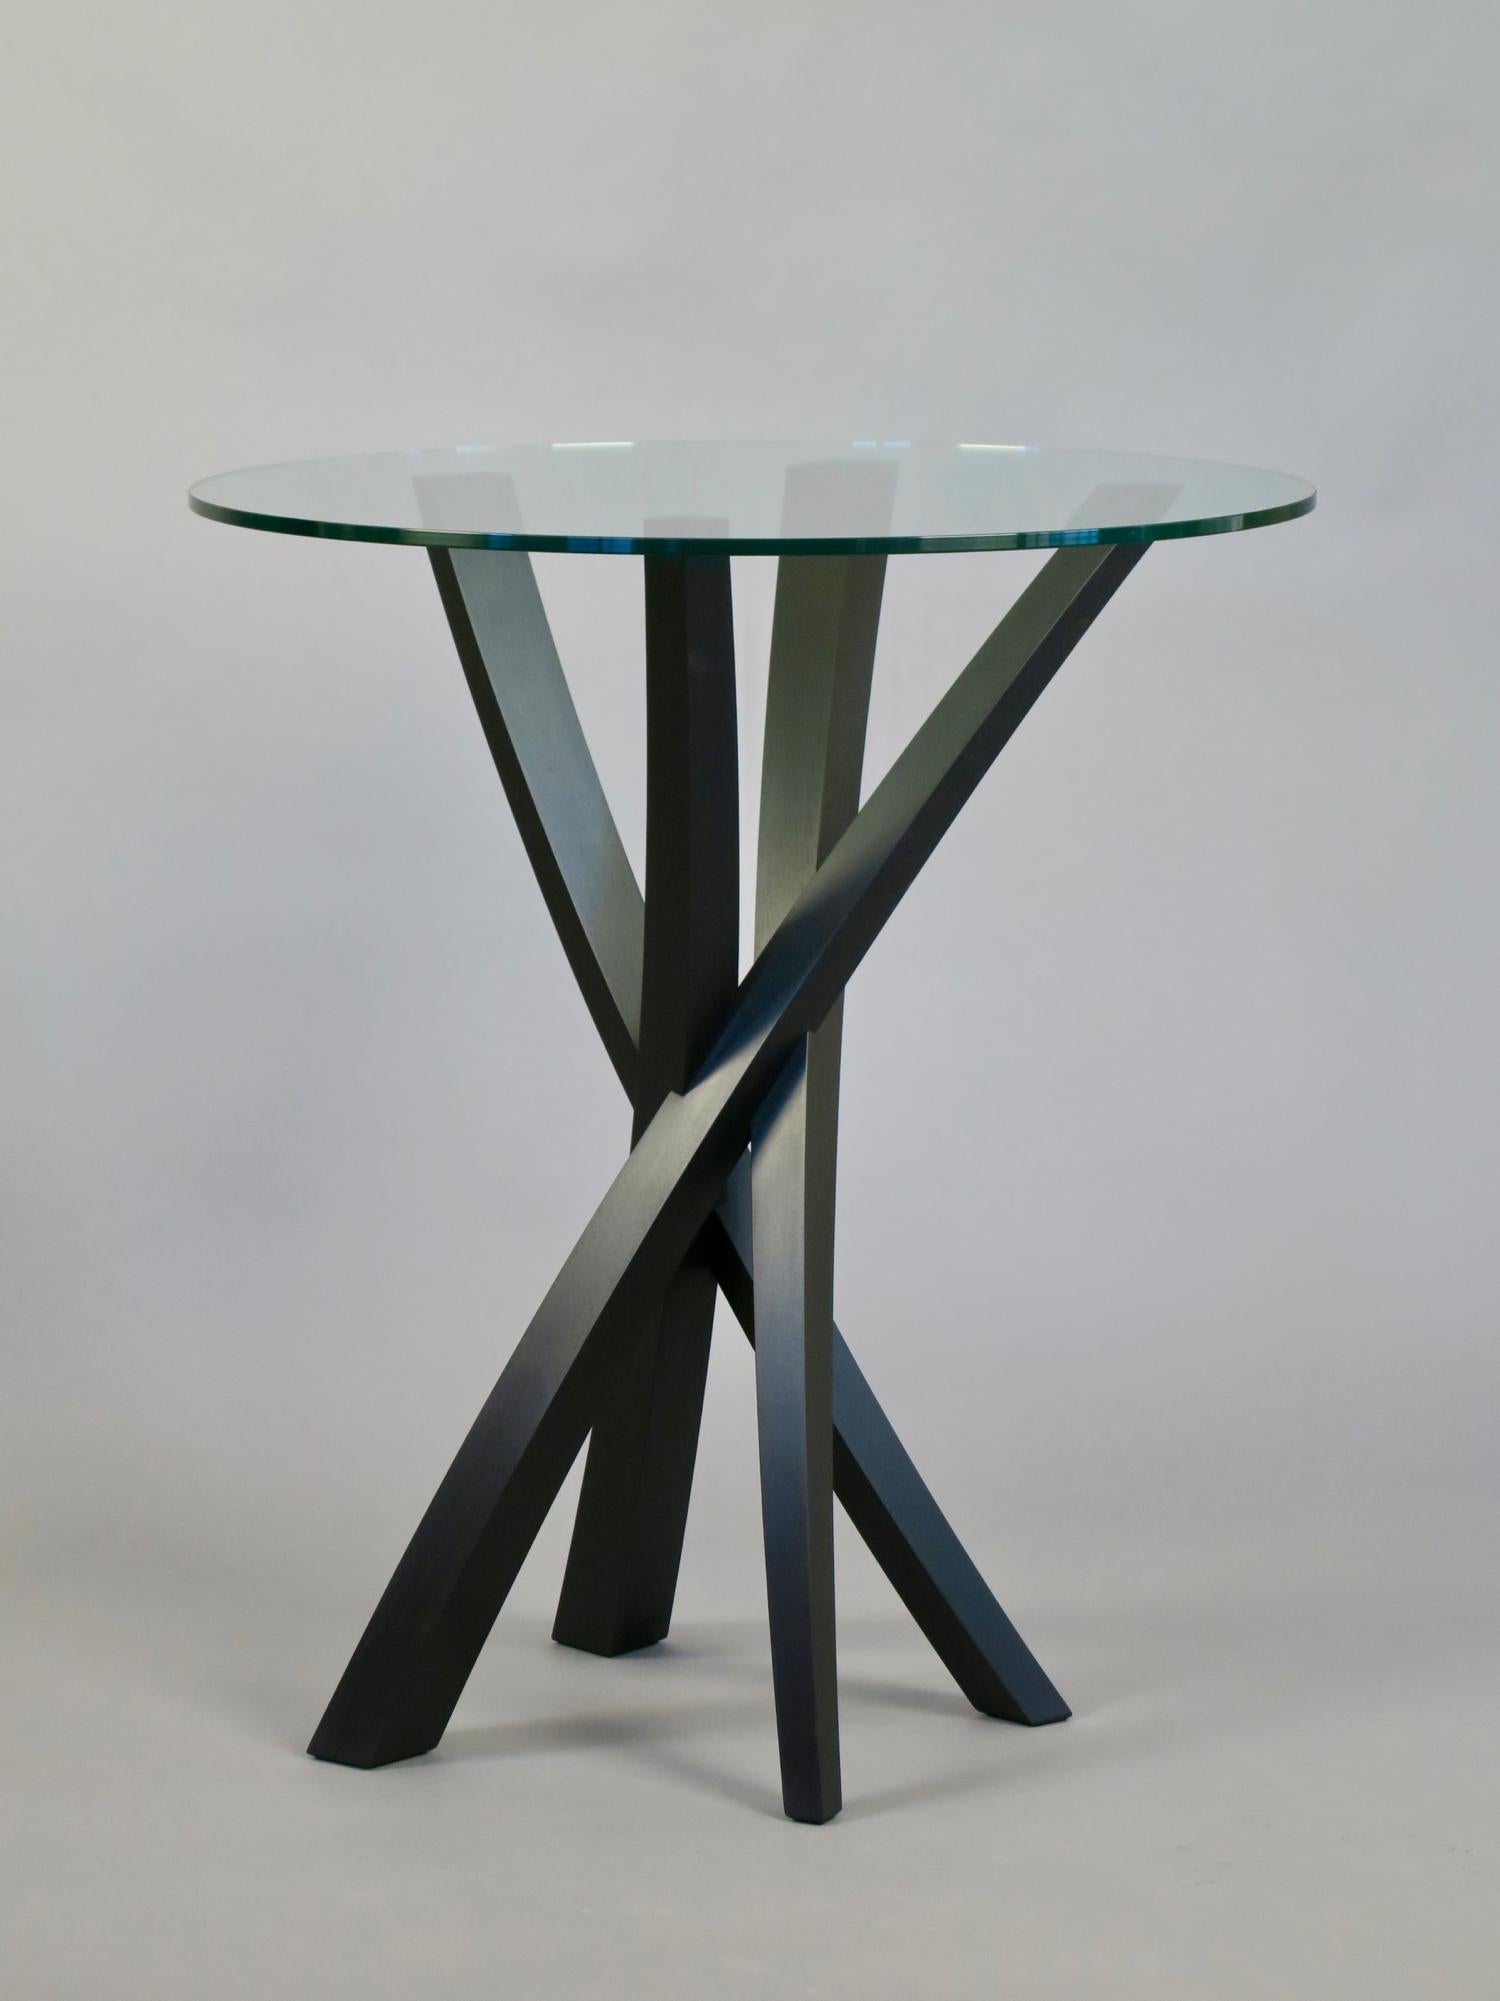 American Sculptural Walnut and Glass Side Table by Thomas Throop/ Black Creek Designs For Sale